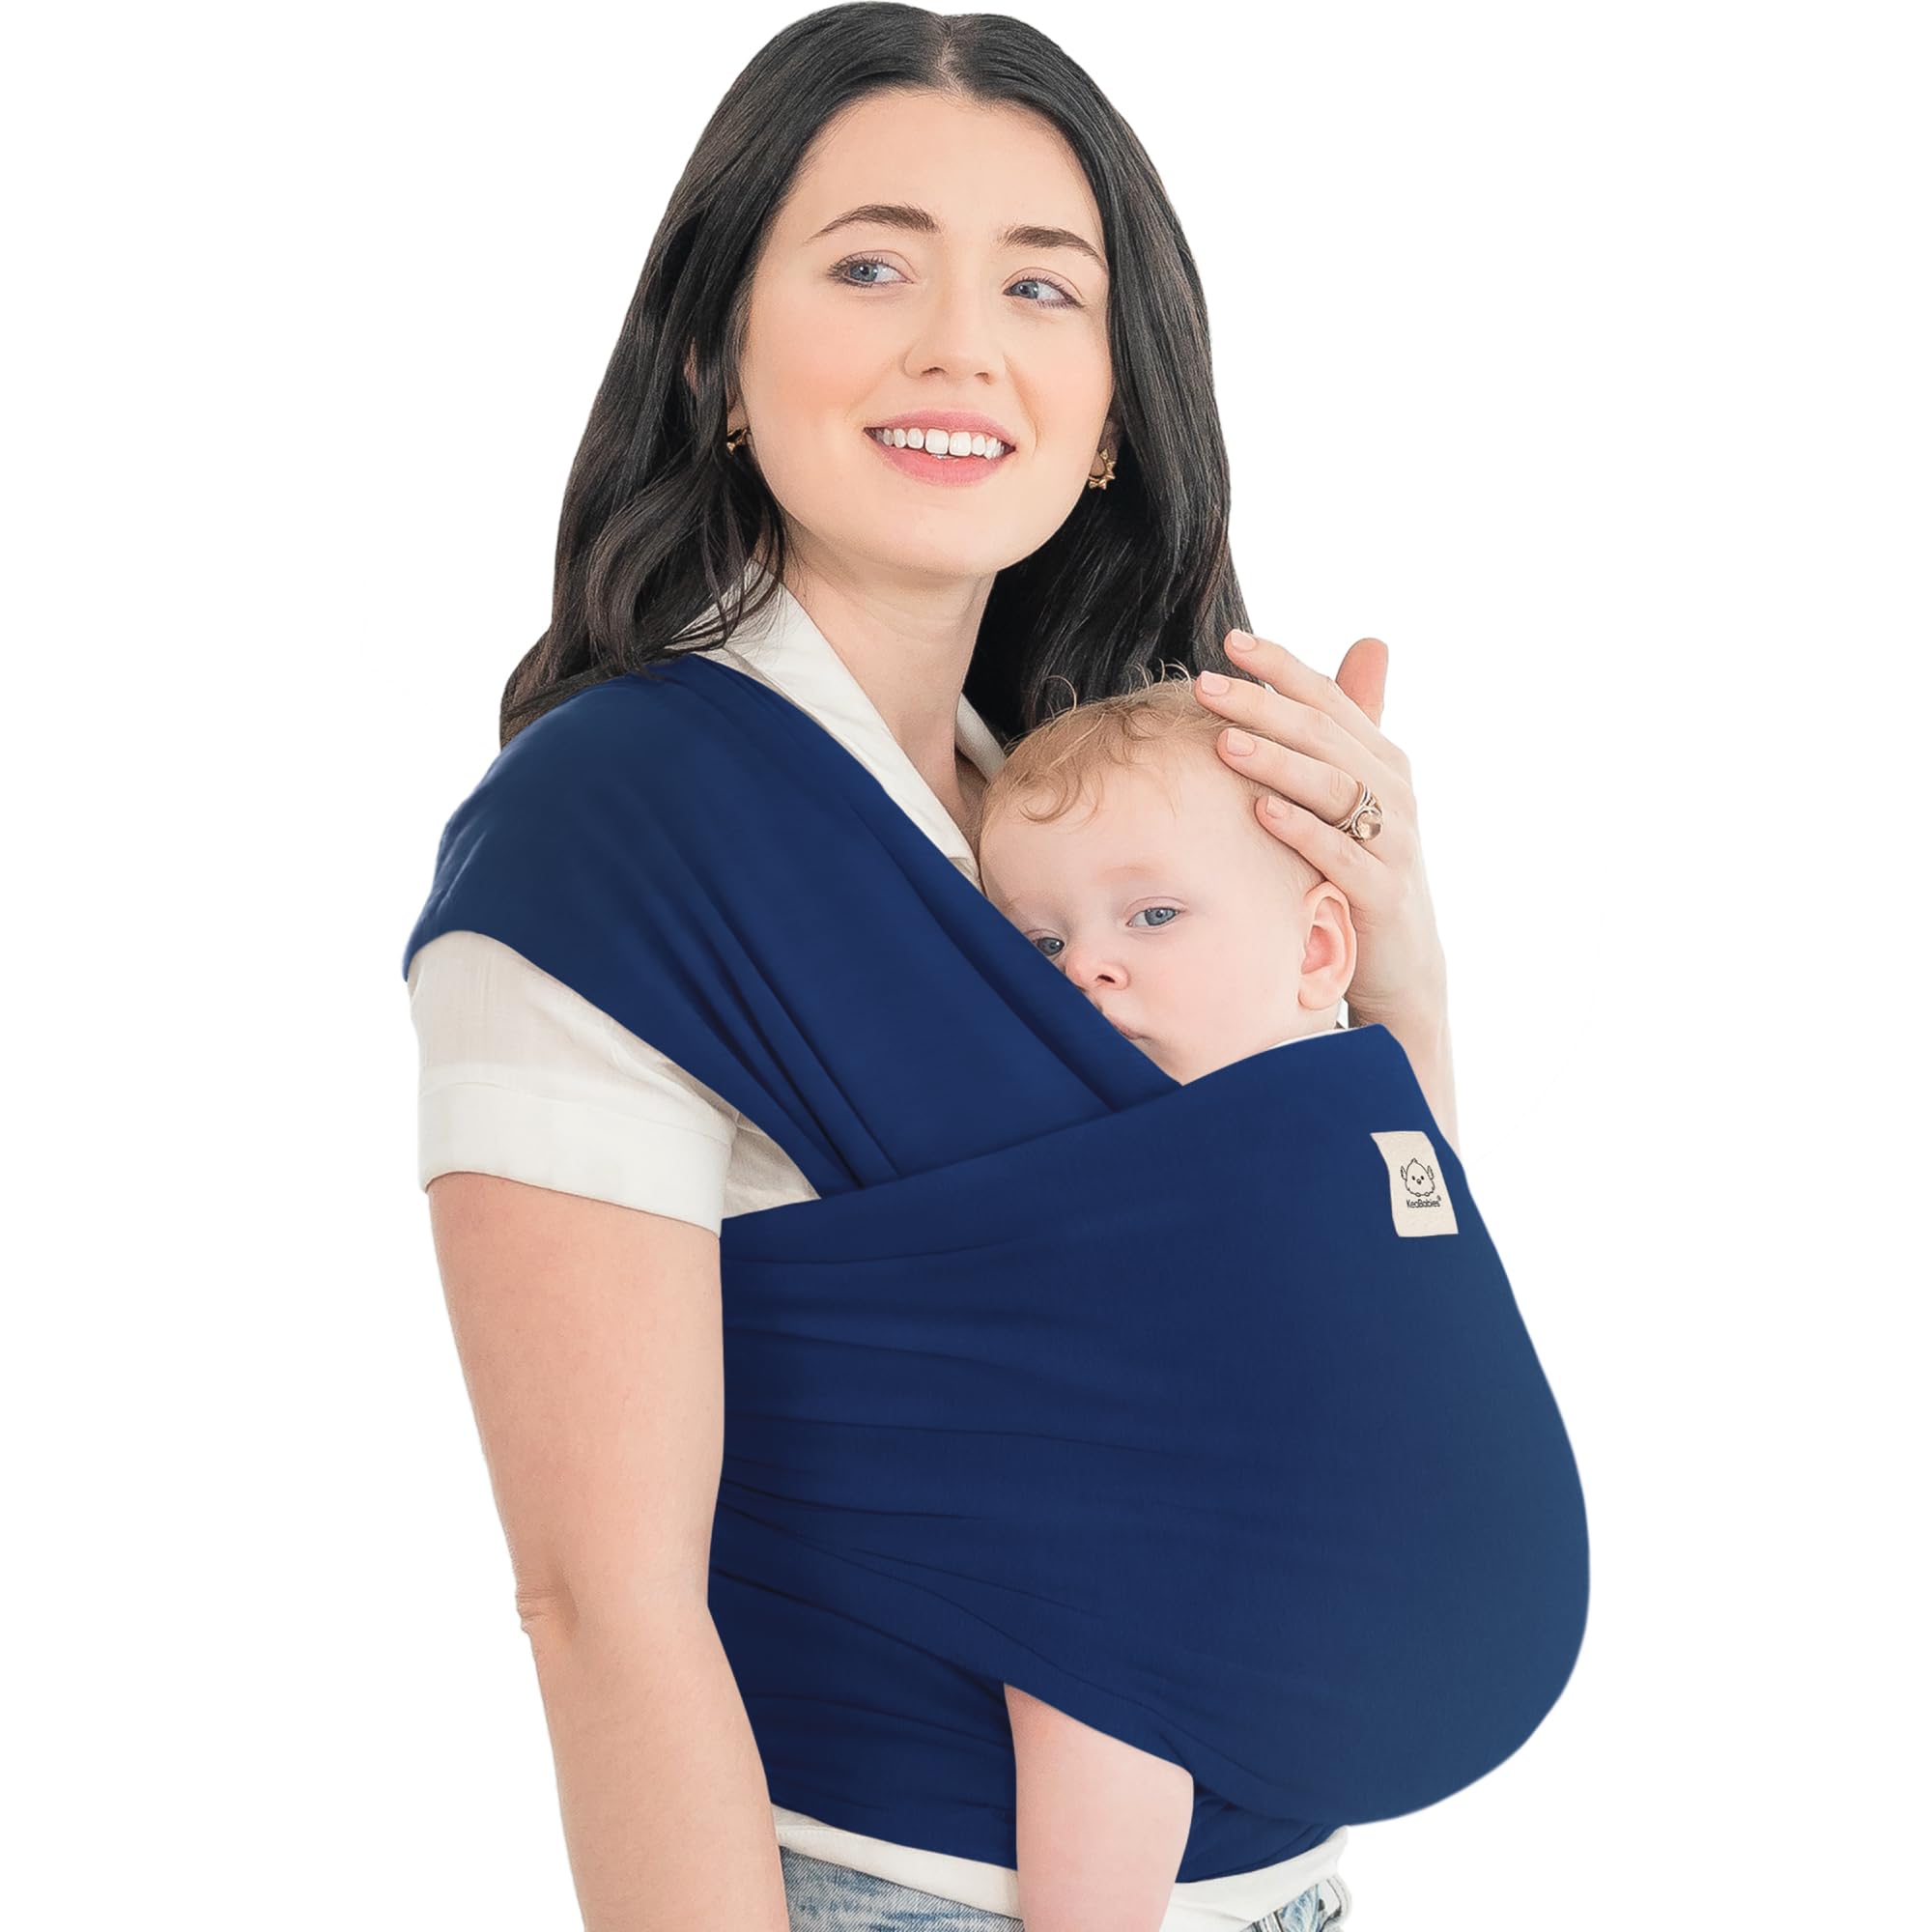 KeaBabies Baby Wrap carrier - All in 1 Original Breathable Baby Sling, Lightweight,Hands Free Baby carrier Sling, Baby carrier W